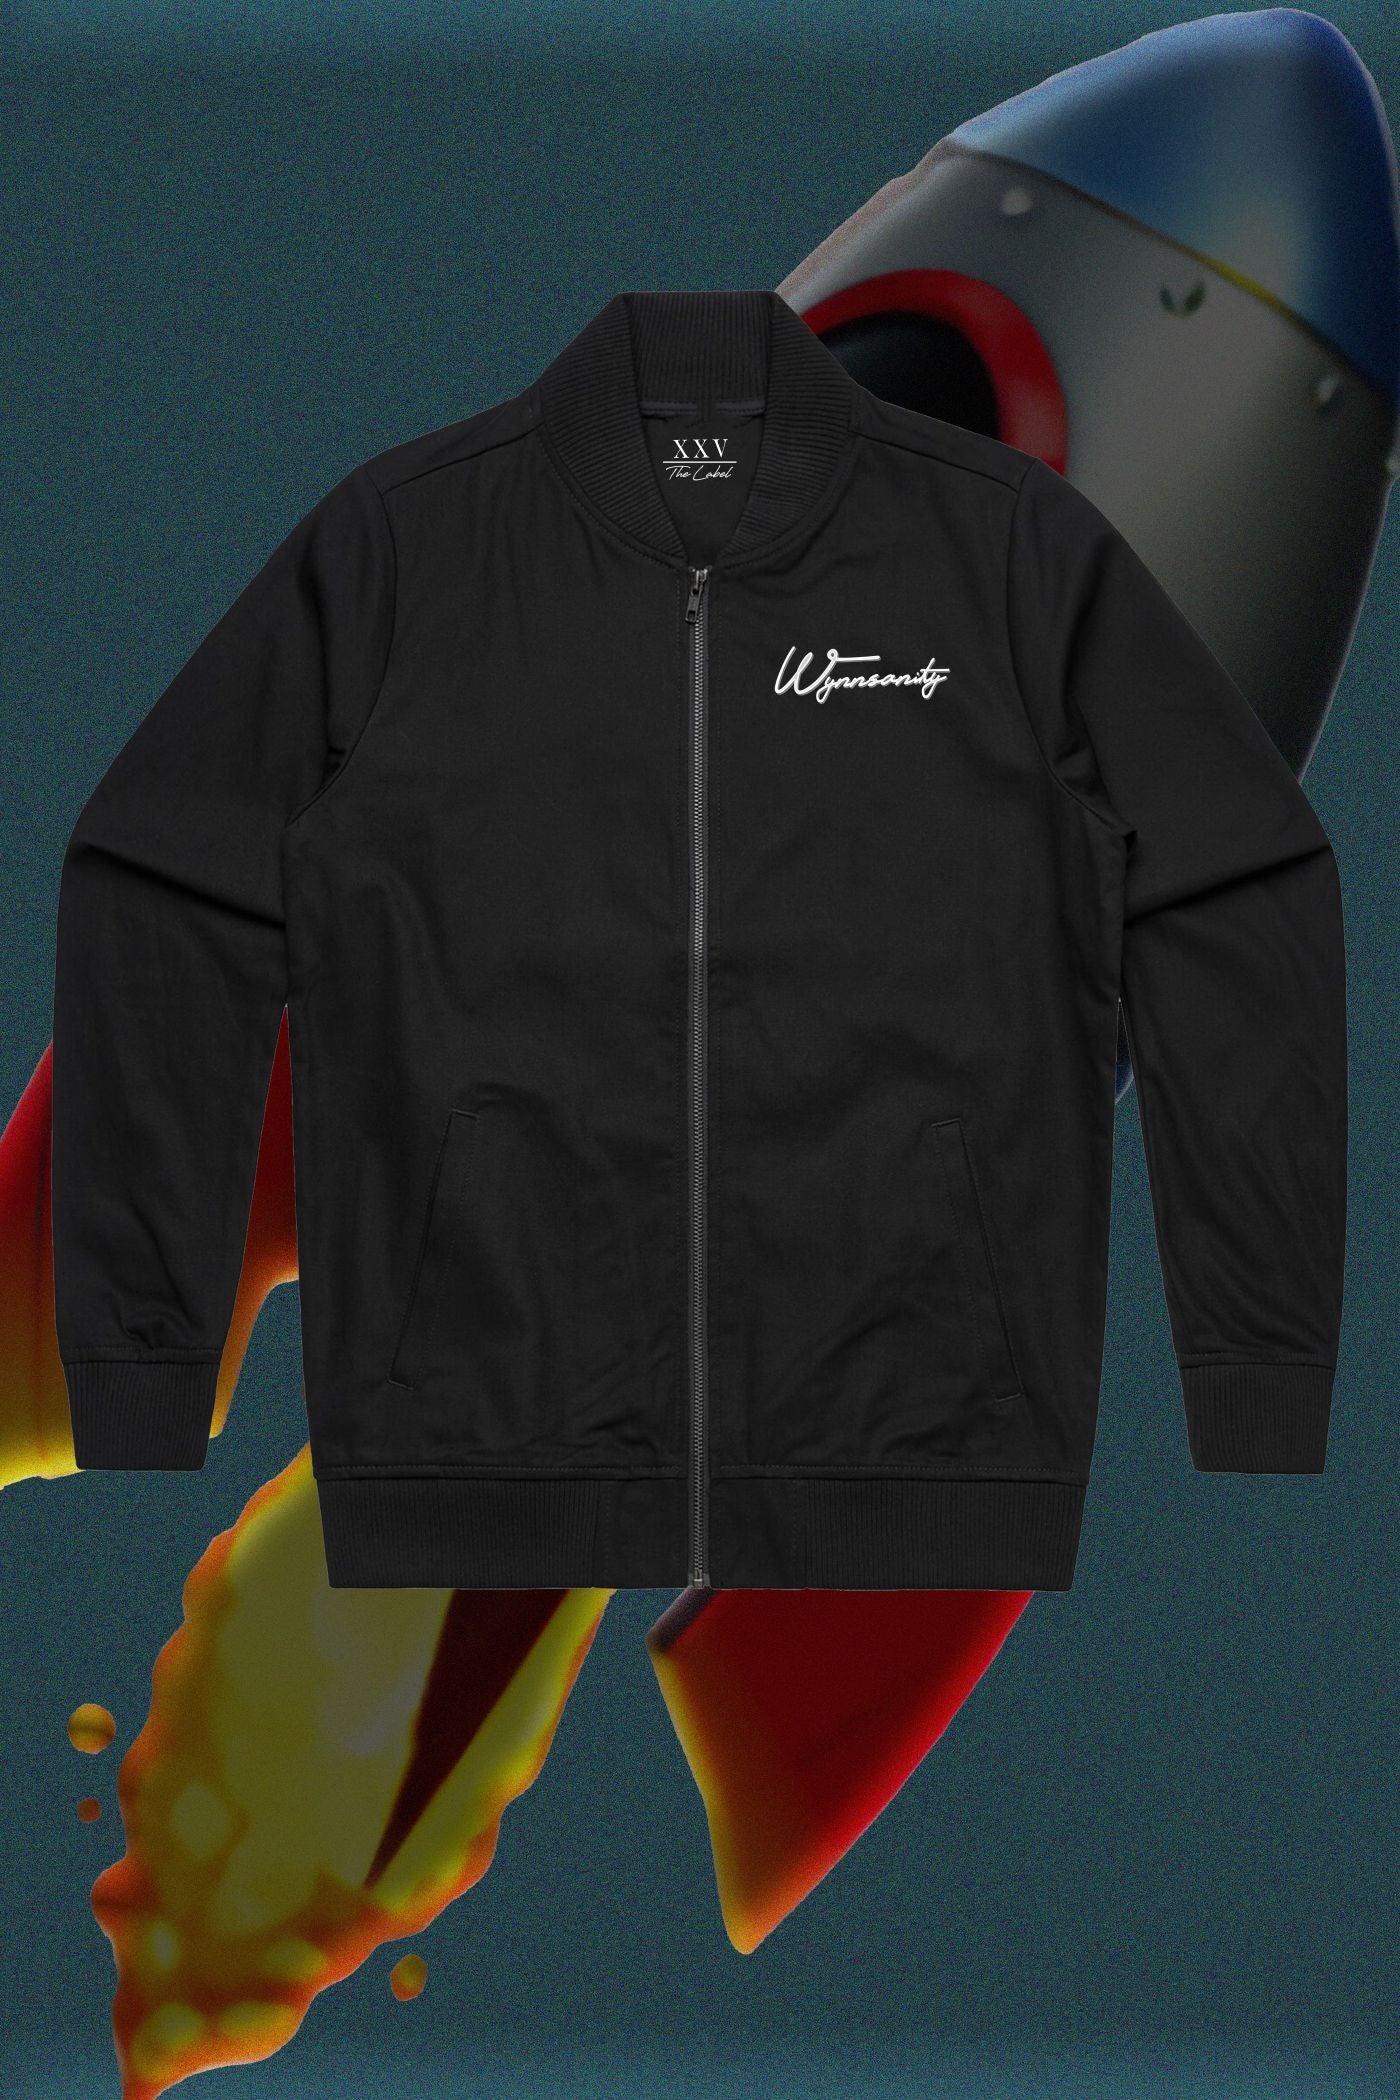 LIMITED Wynnsanity Signature Bomber